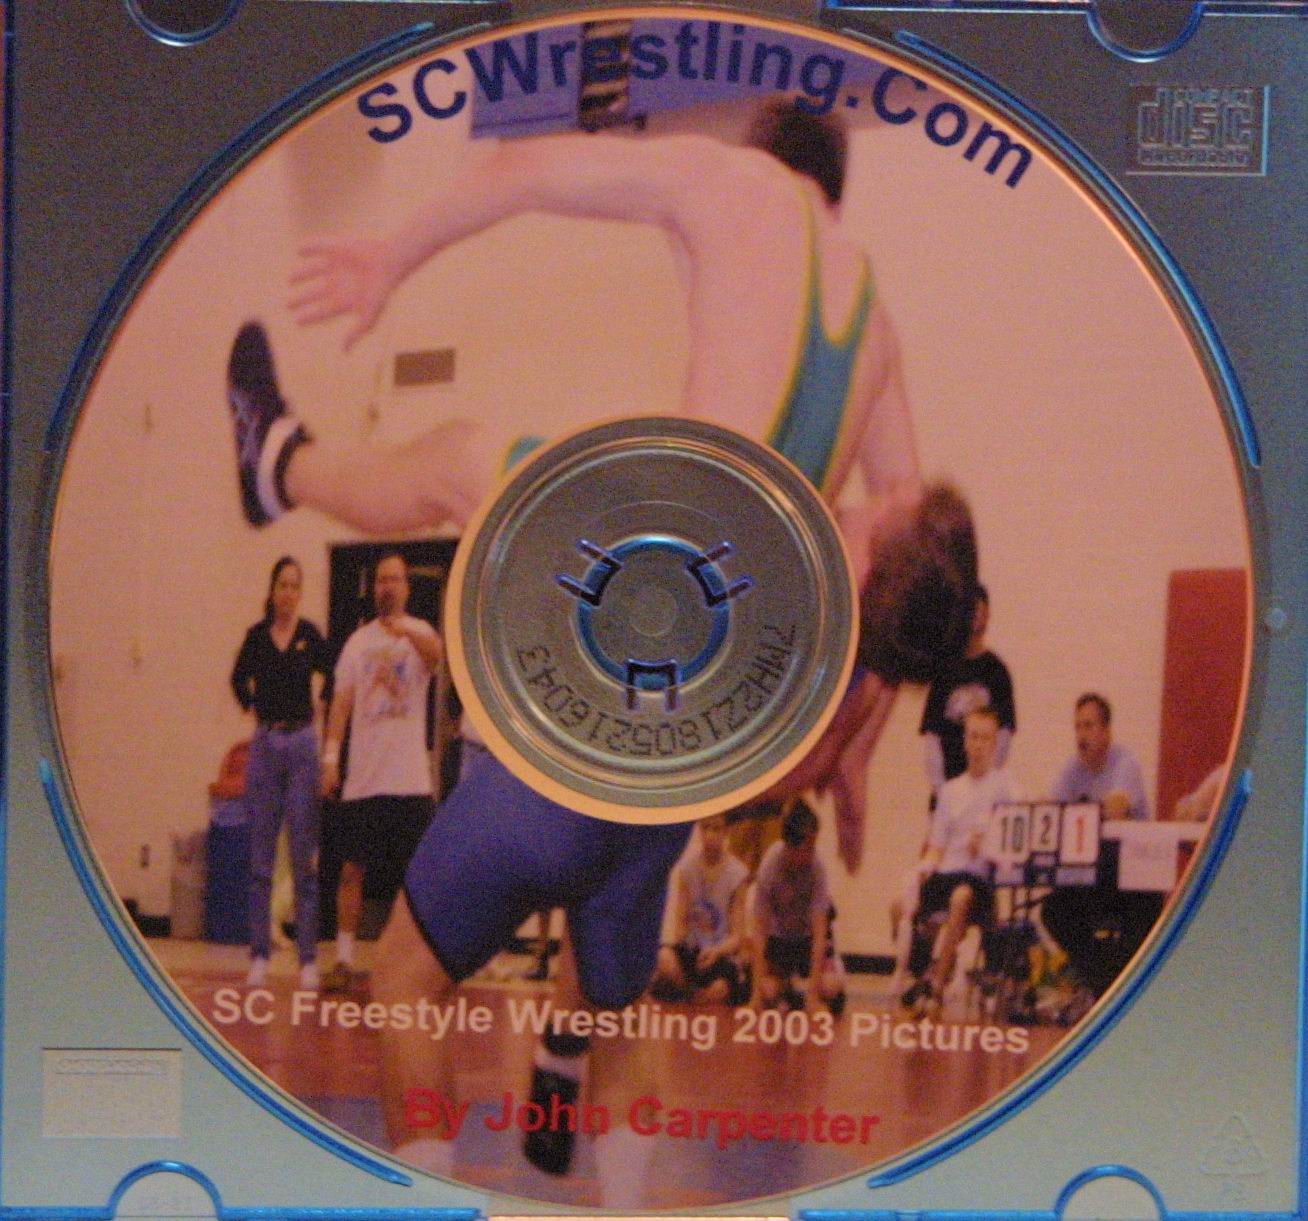 Picture of the 2003 SCWrestling.com Freestyle pictures CD